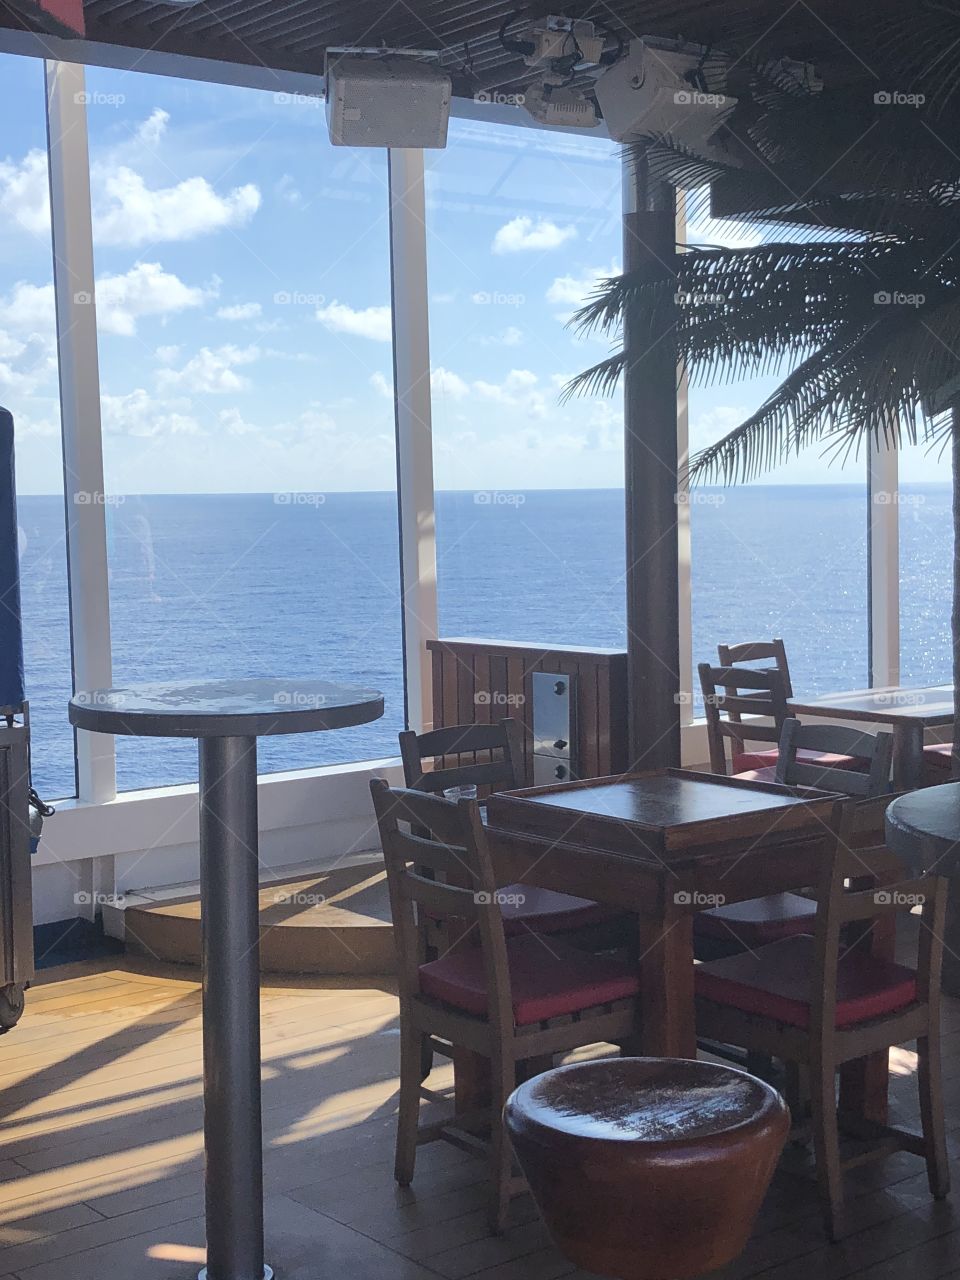 Nice ocean view at lunch September 2018! 